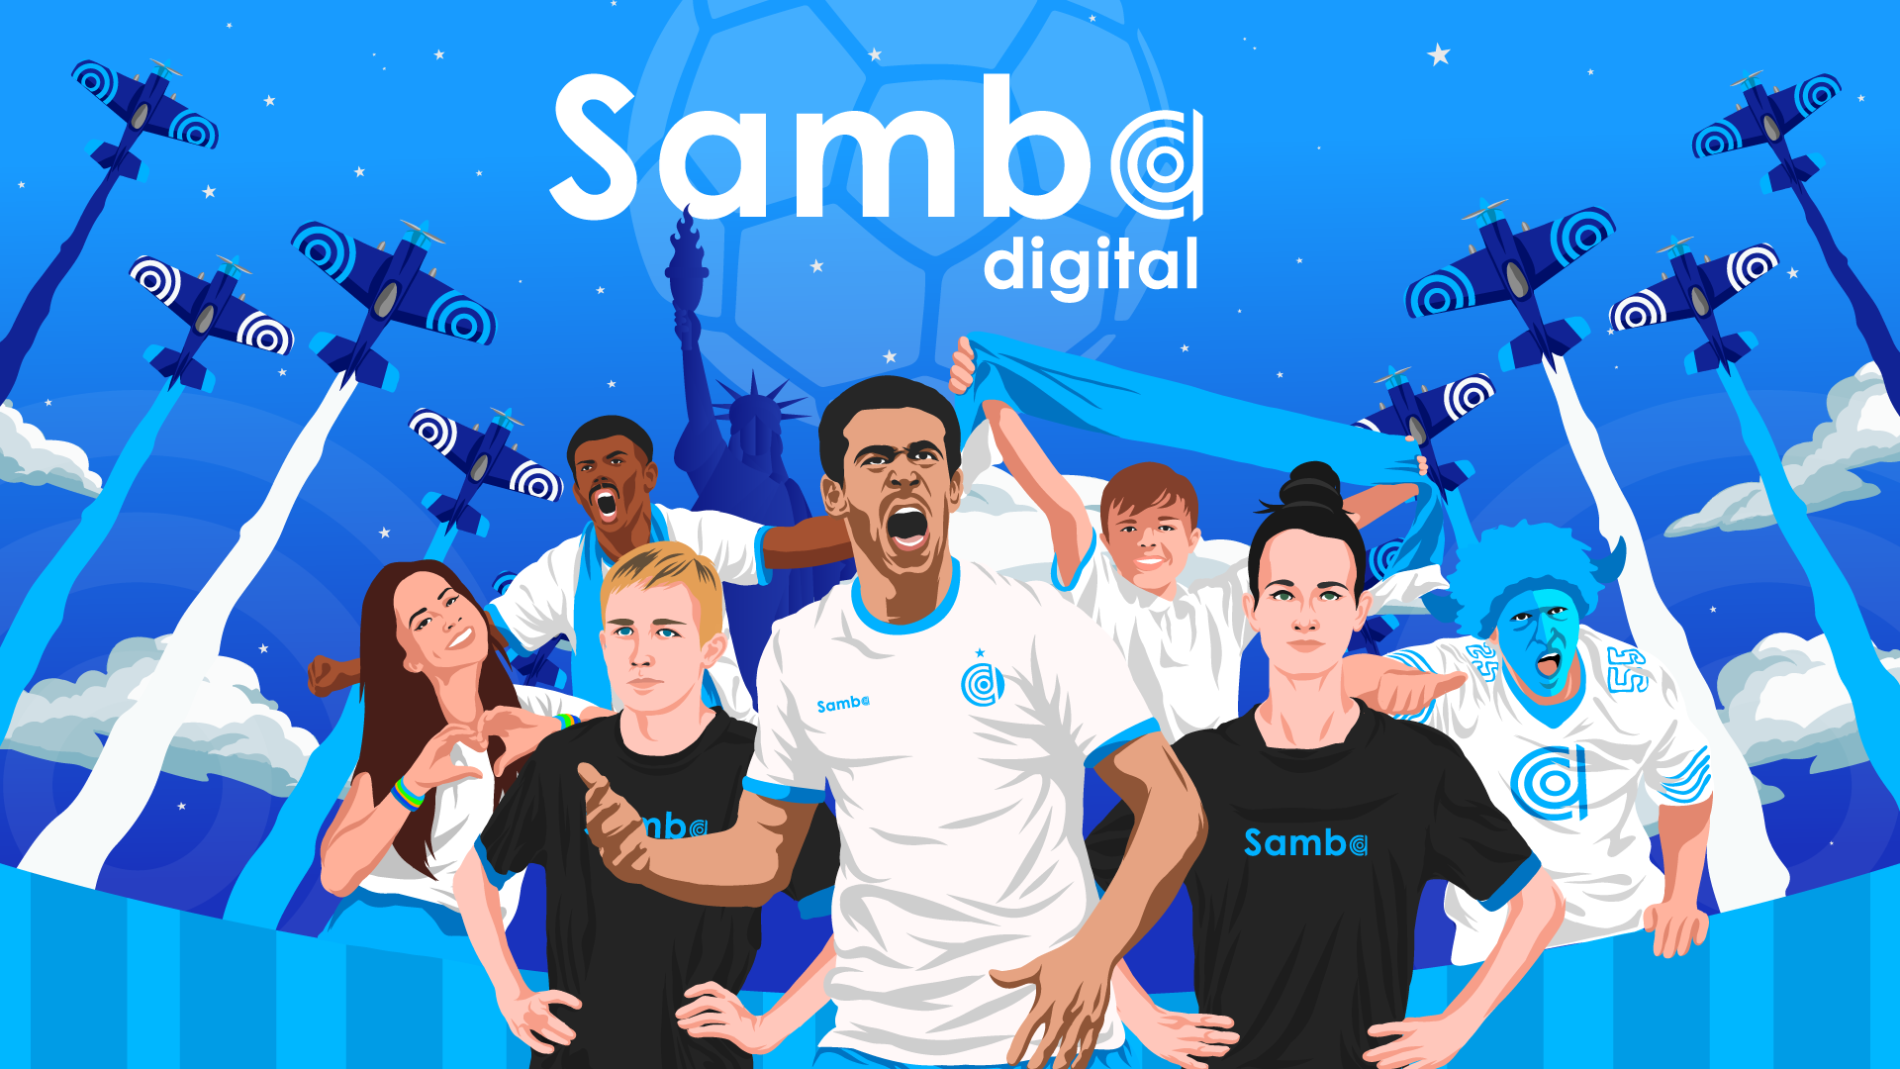 Press Release: Samba Digital confirms a positive trend for its business growth